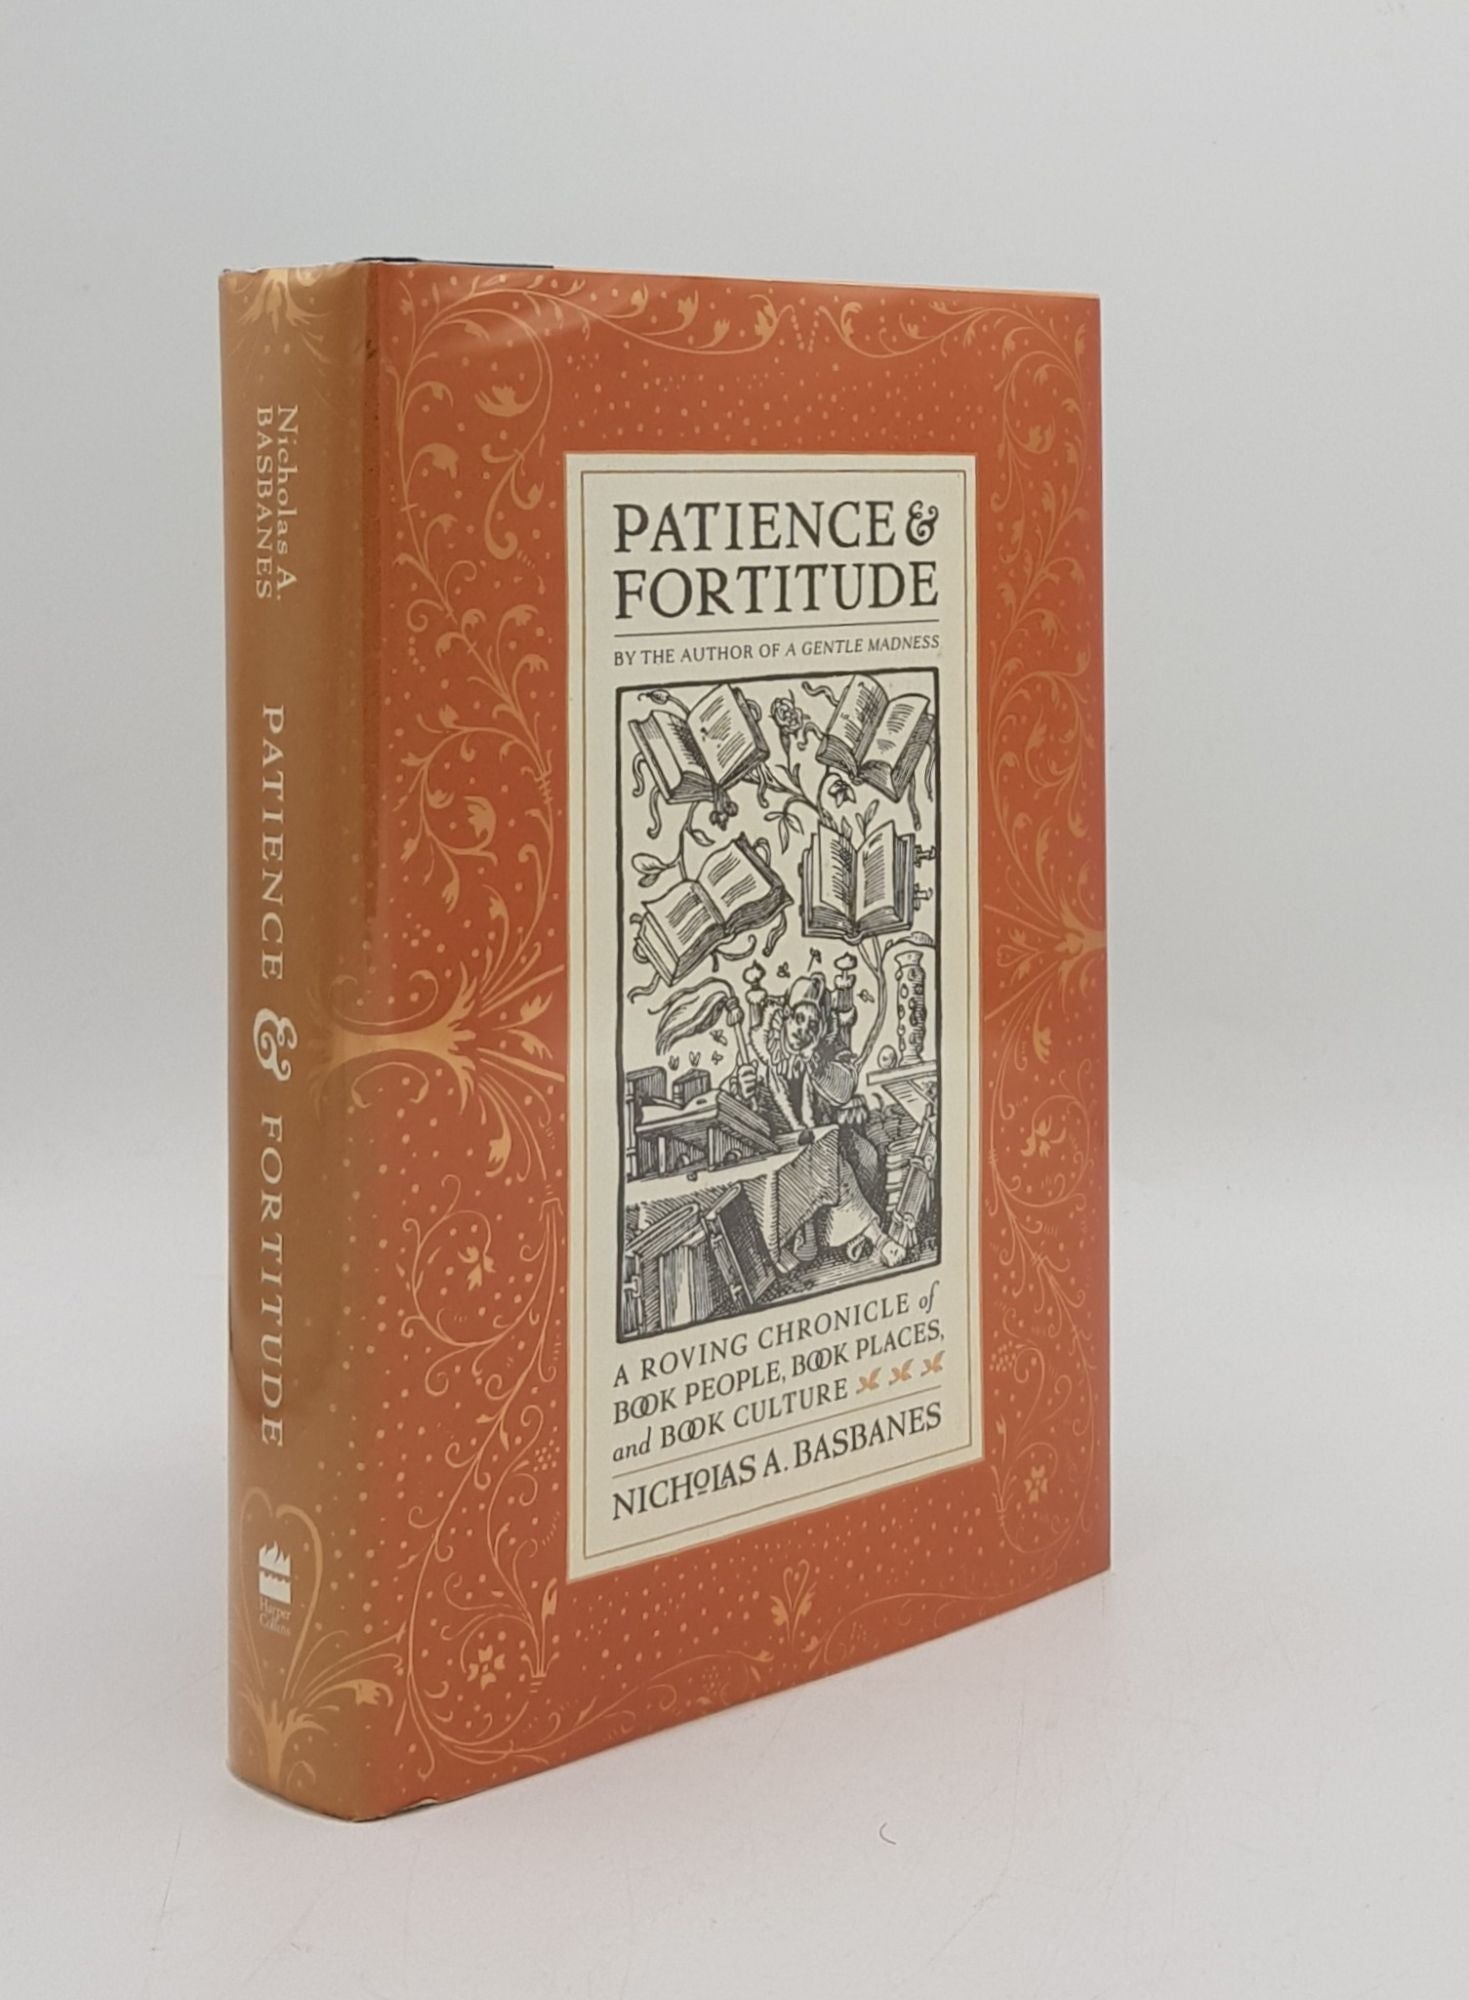 BASBANES Nicholas A. - Patience and Fortitude a Roving Chronicle of Book People Book Places and Book Culture